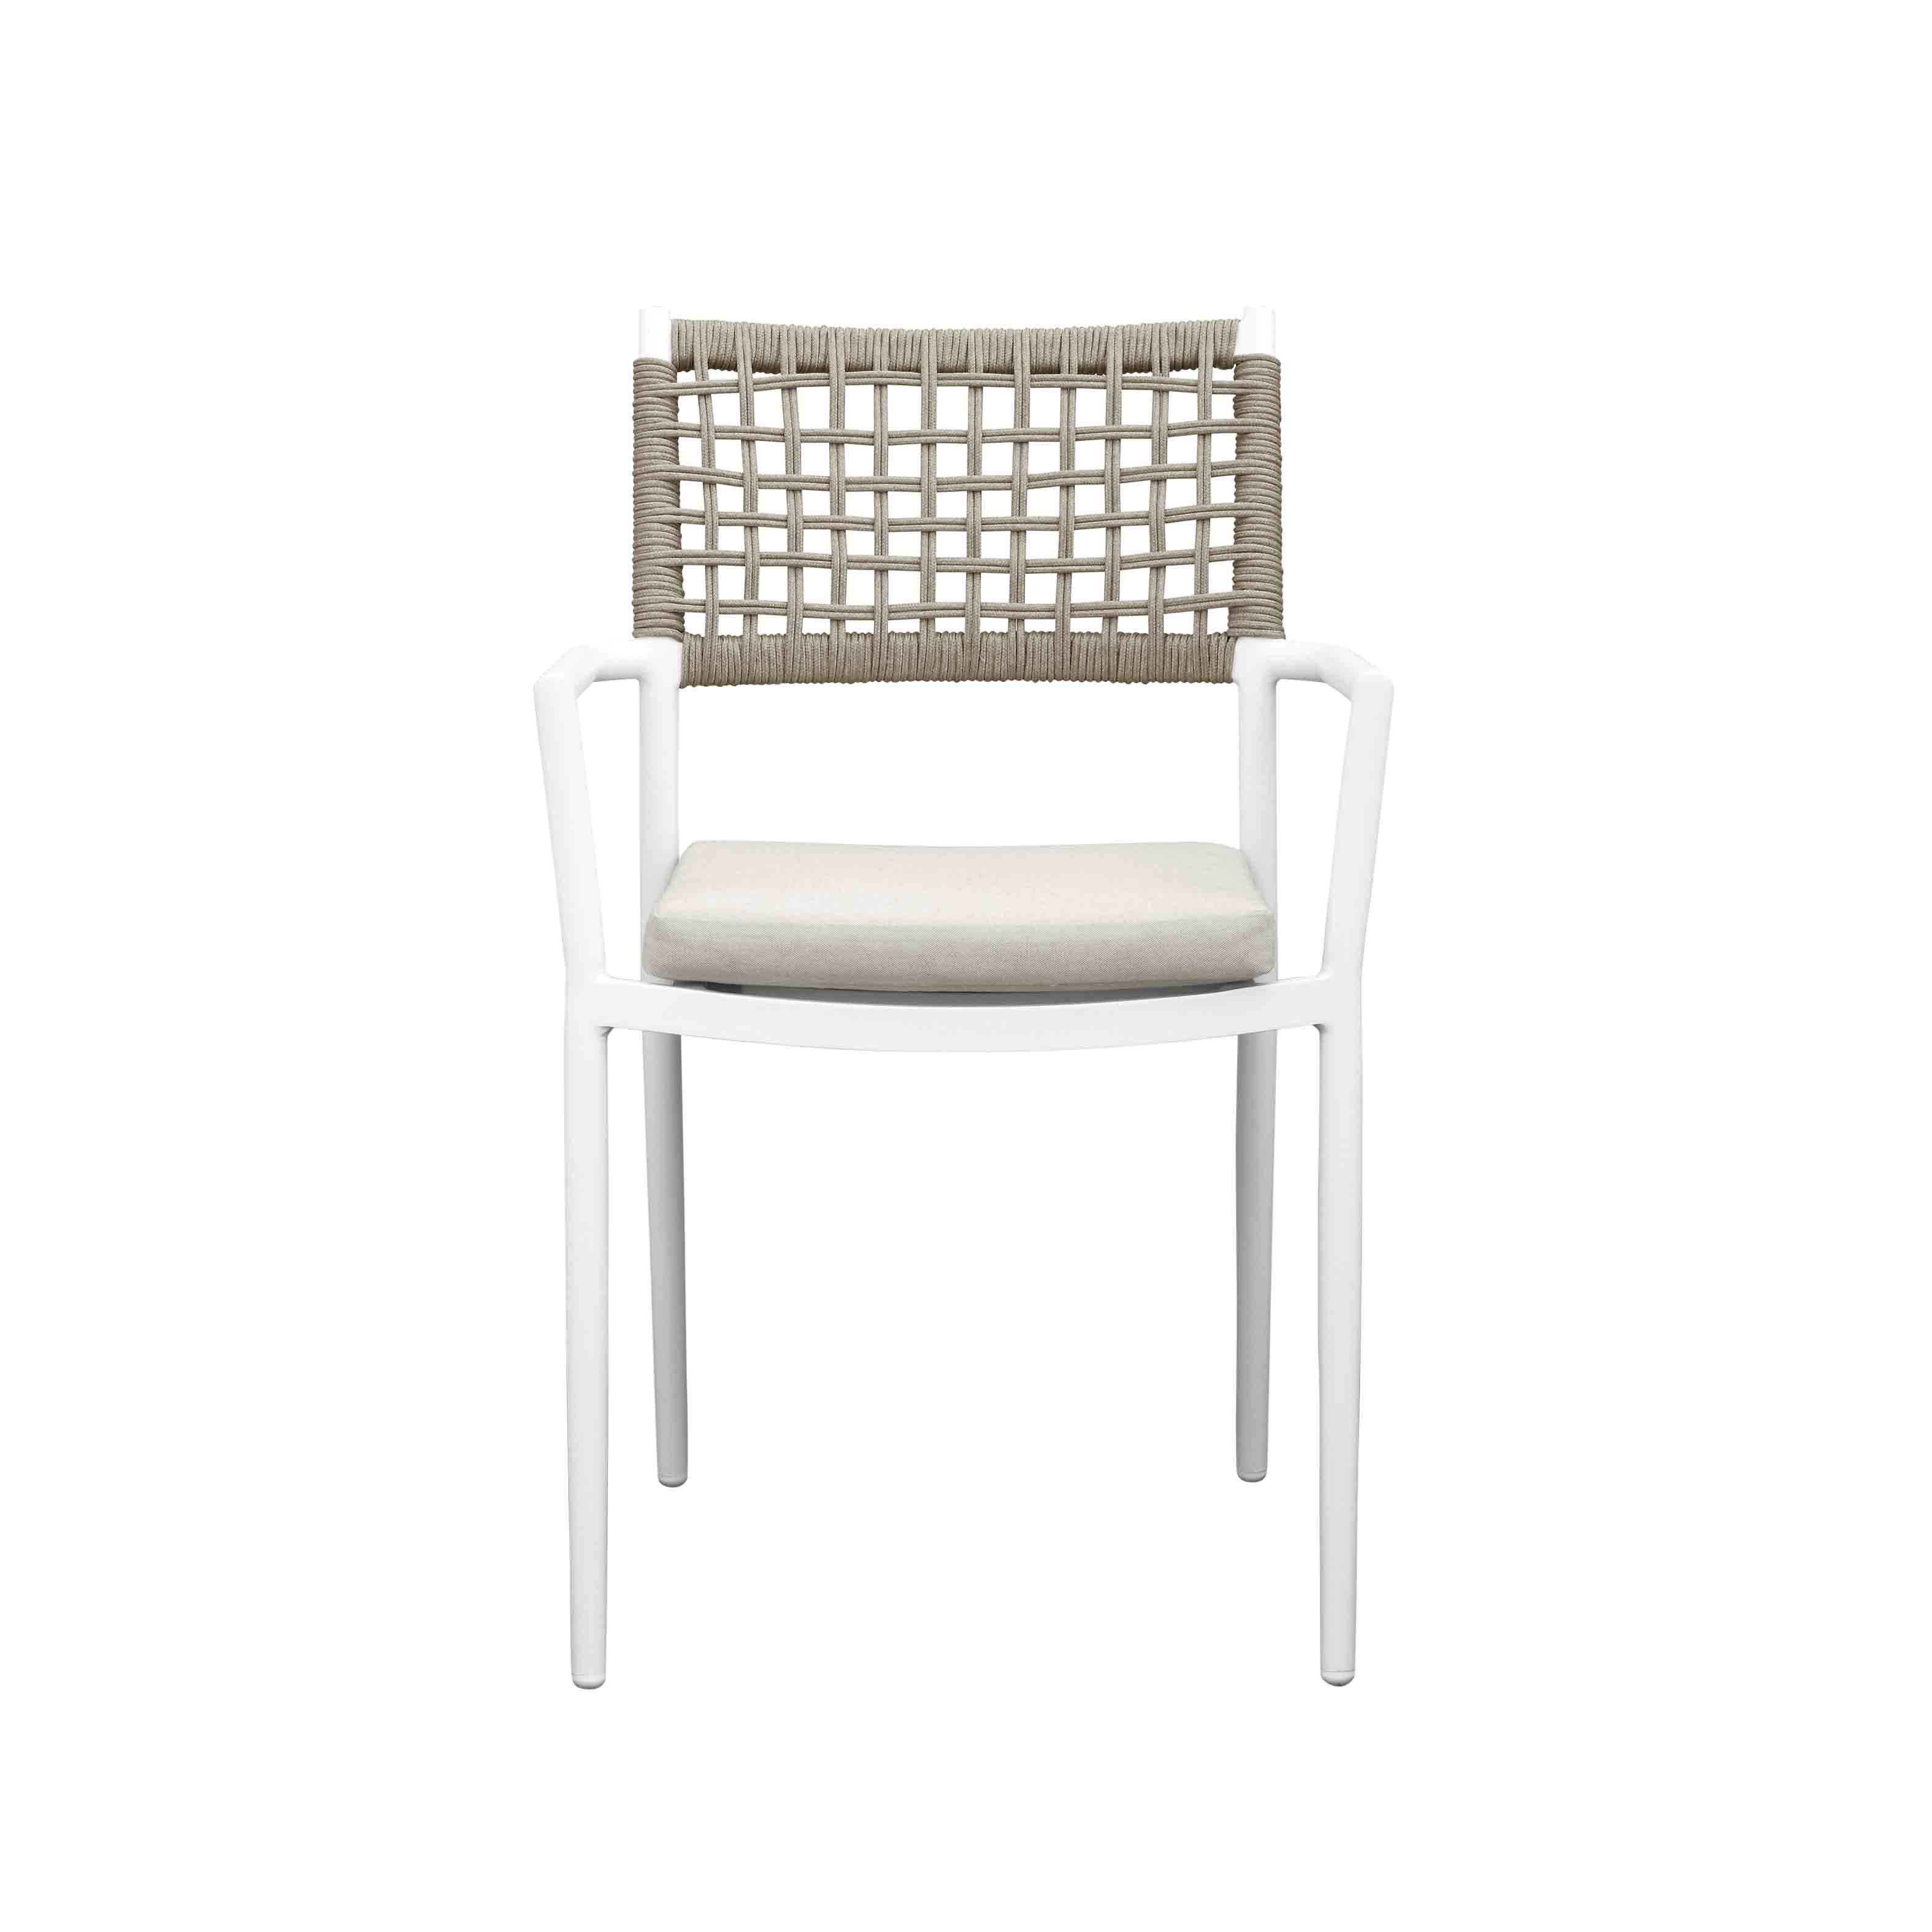 Mocha rope dining chair S3